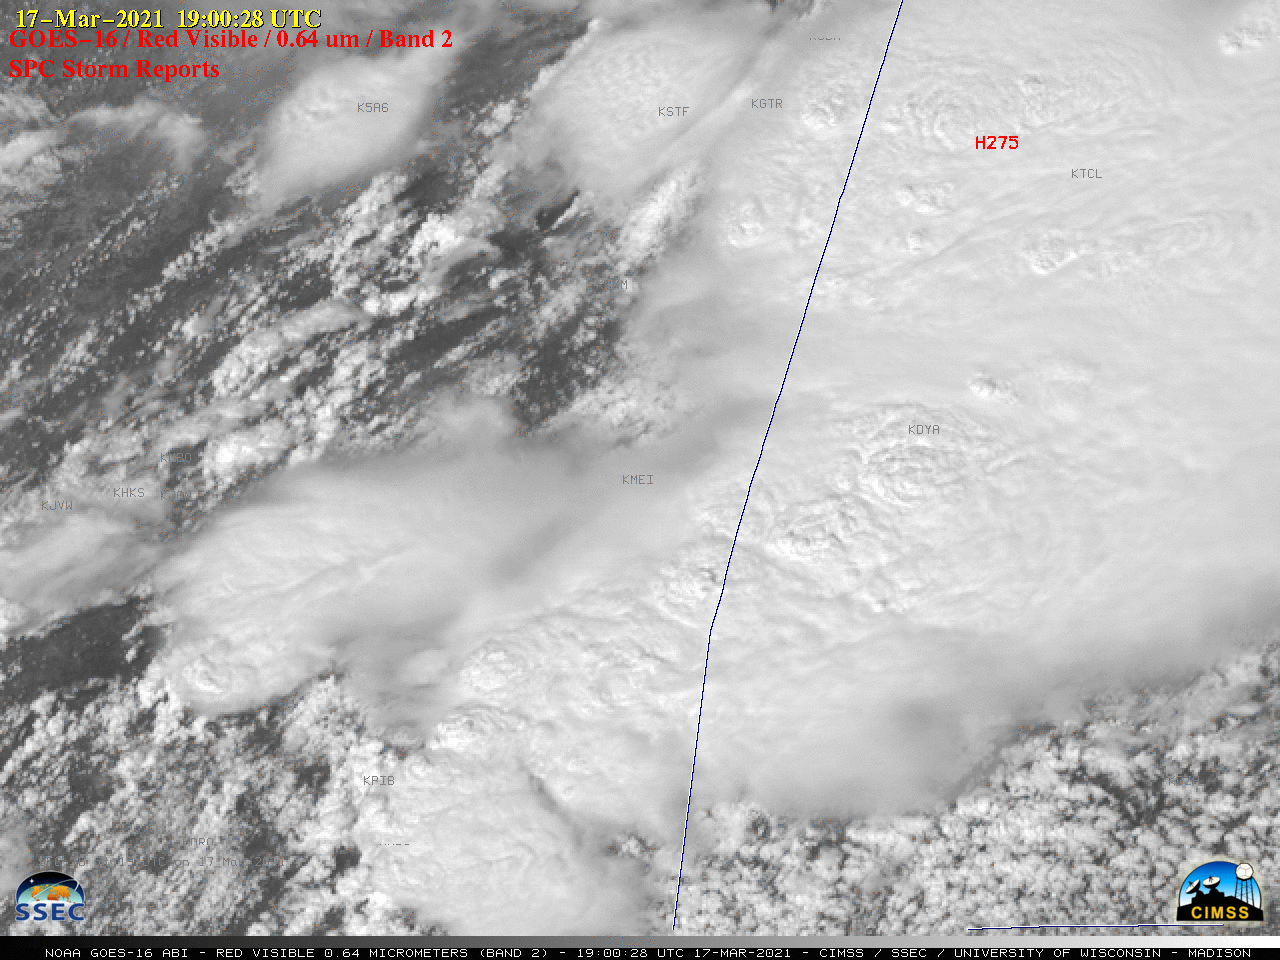 GOES-16 “Red” Visible (0.64 µm) images, with time-matched SPC Storm Reports plotted in red [click to play animation | MP4]